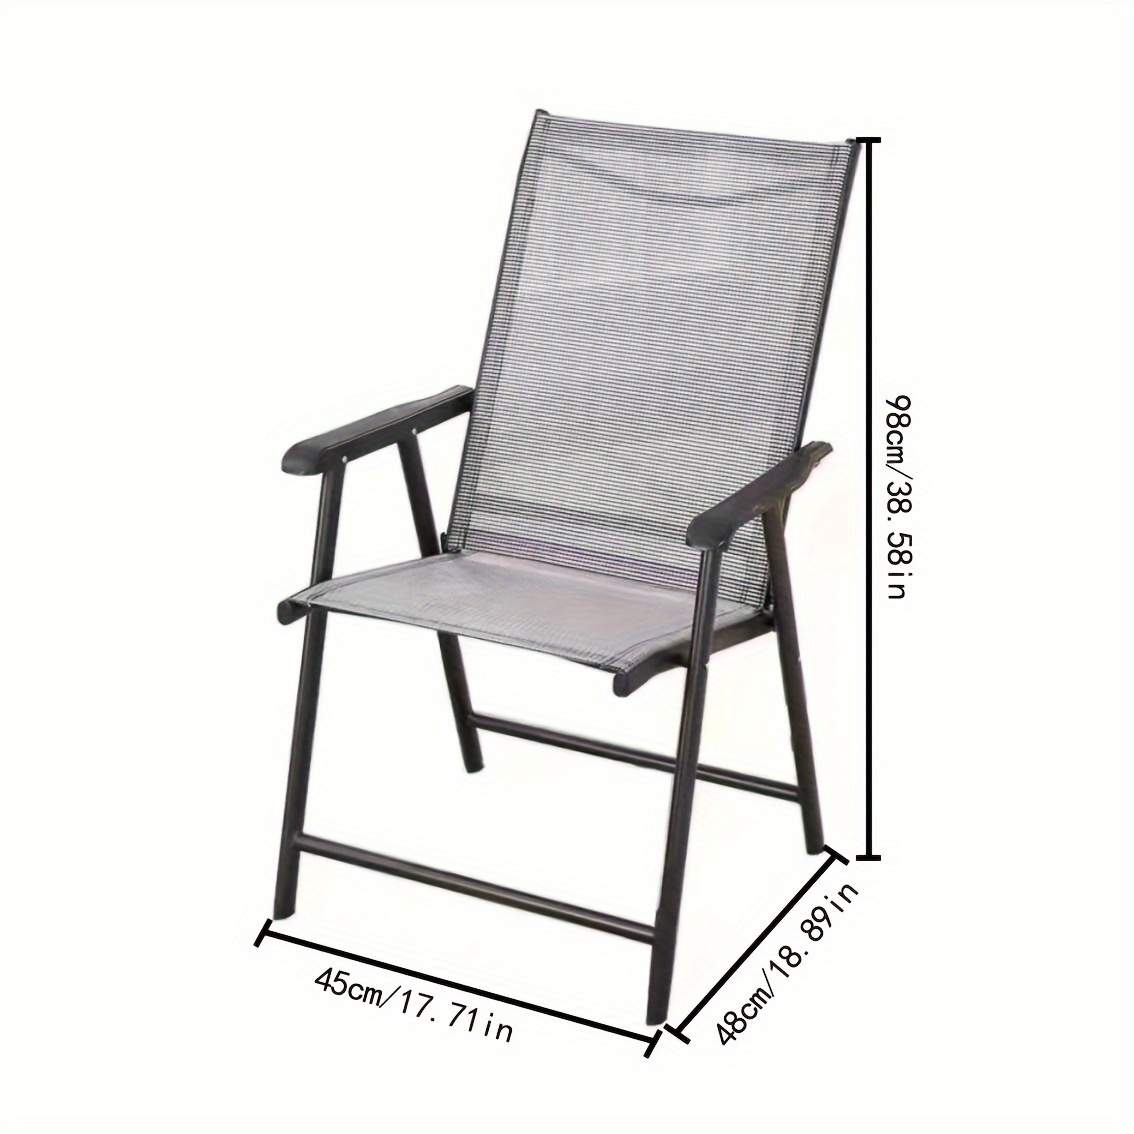 1pc Folding Chair Outdoor Yard Indoor Folding Chair Waterproof Chair  Breathable Comfortable Chair, Shop Now For Limited-time Deals